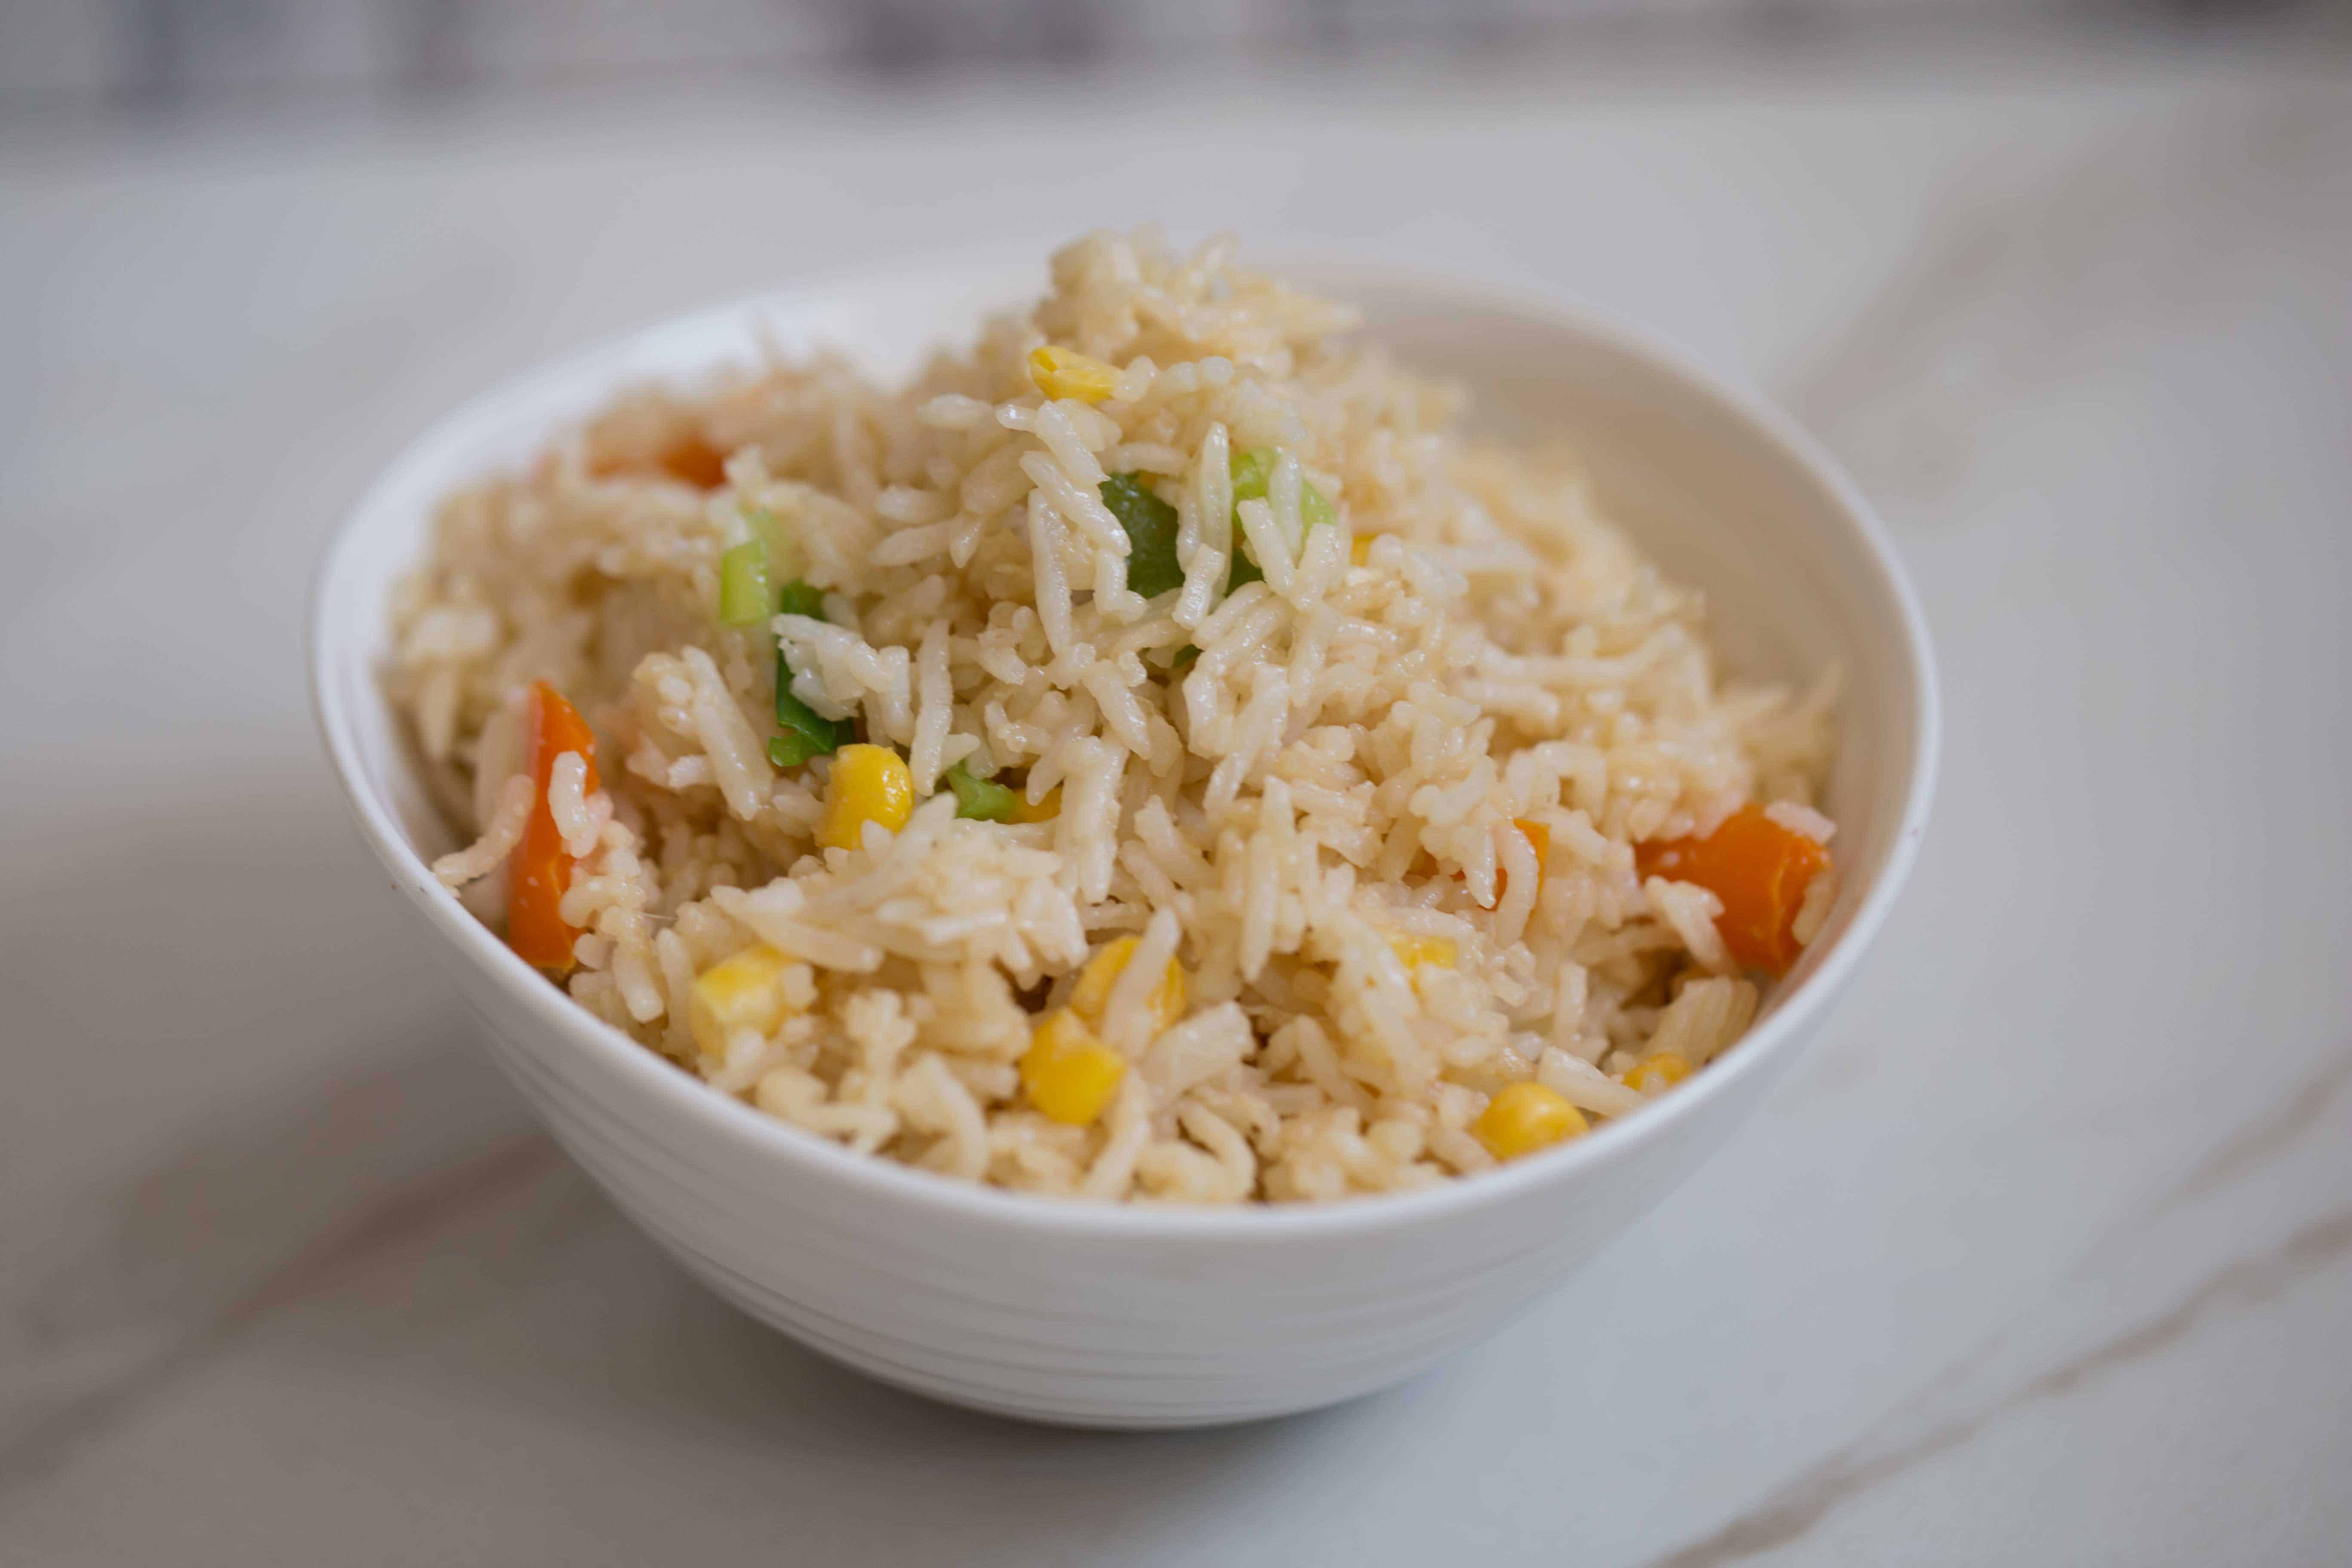 Egg Fried Rice with veg in white bowl on table